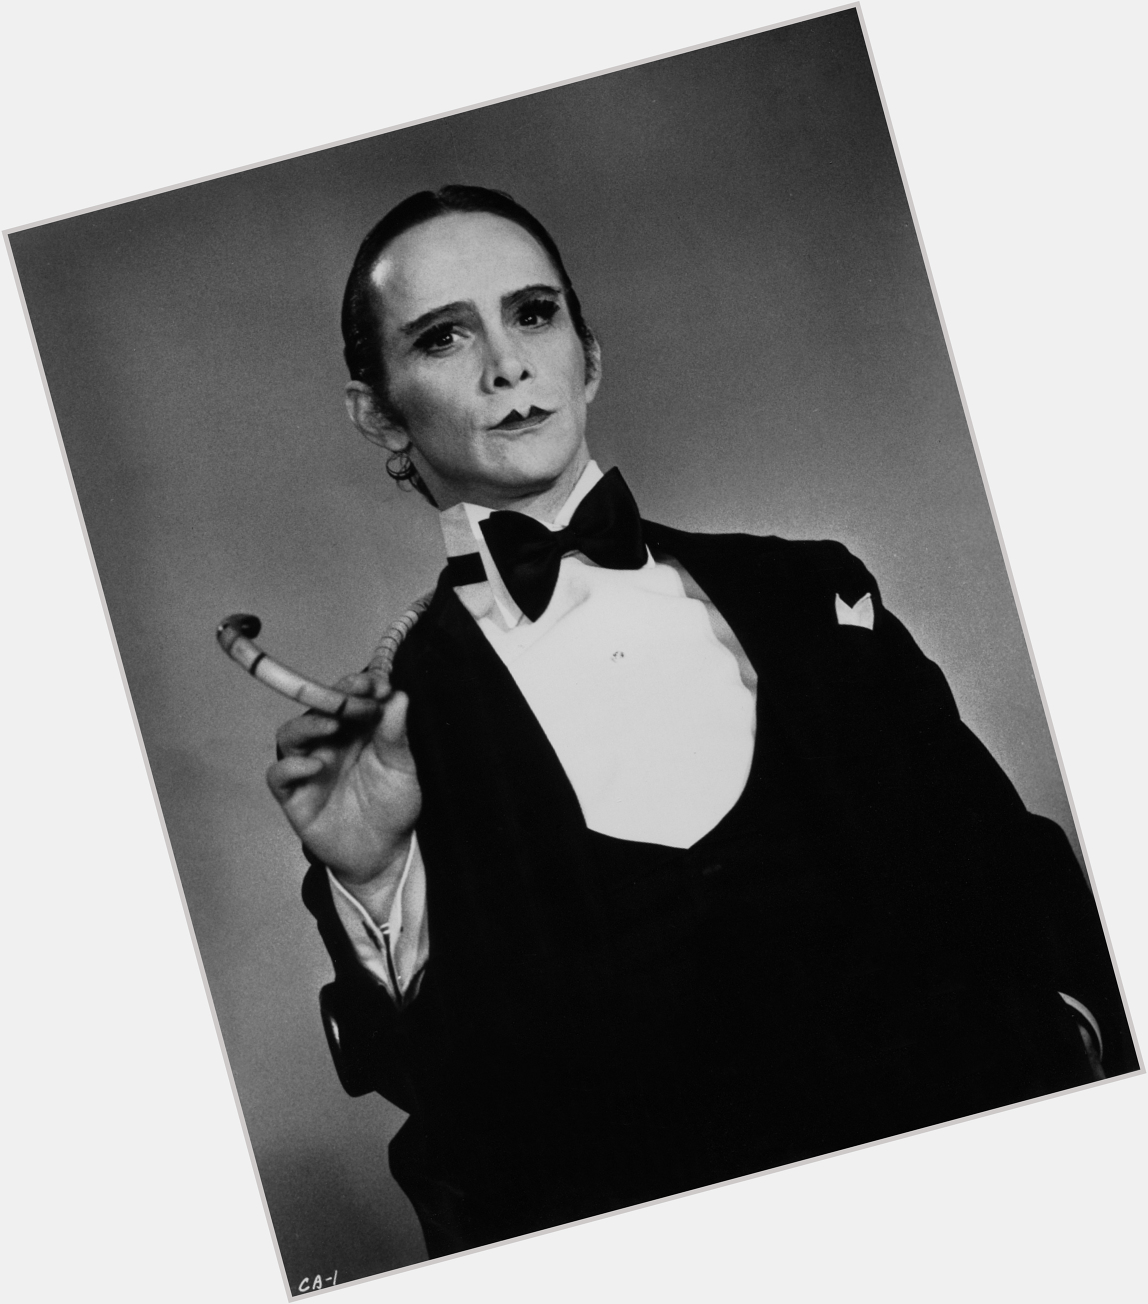 Happy 91st Birthday to the magnificent Joel Grey! 